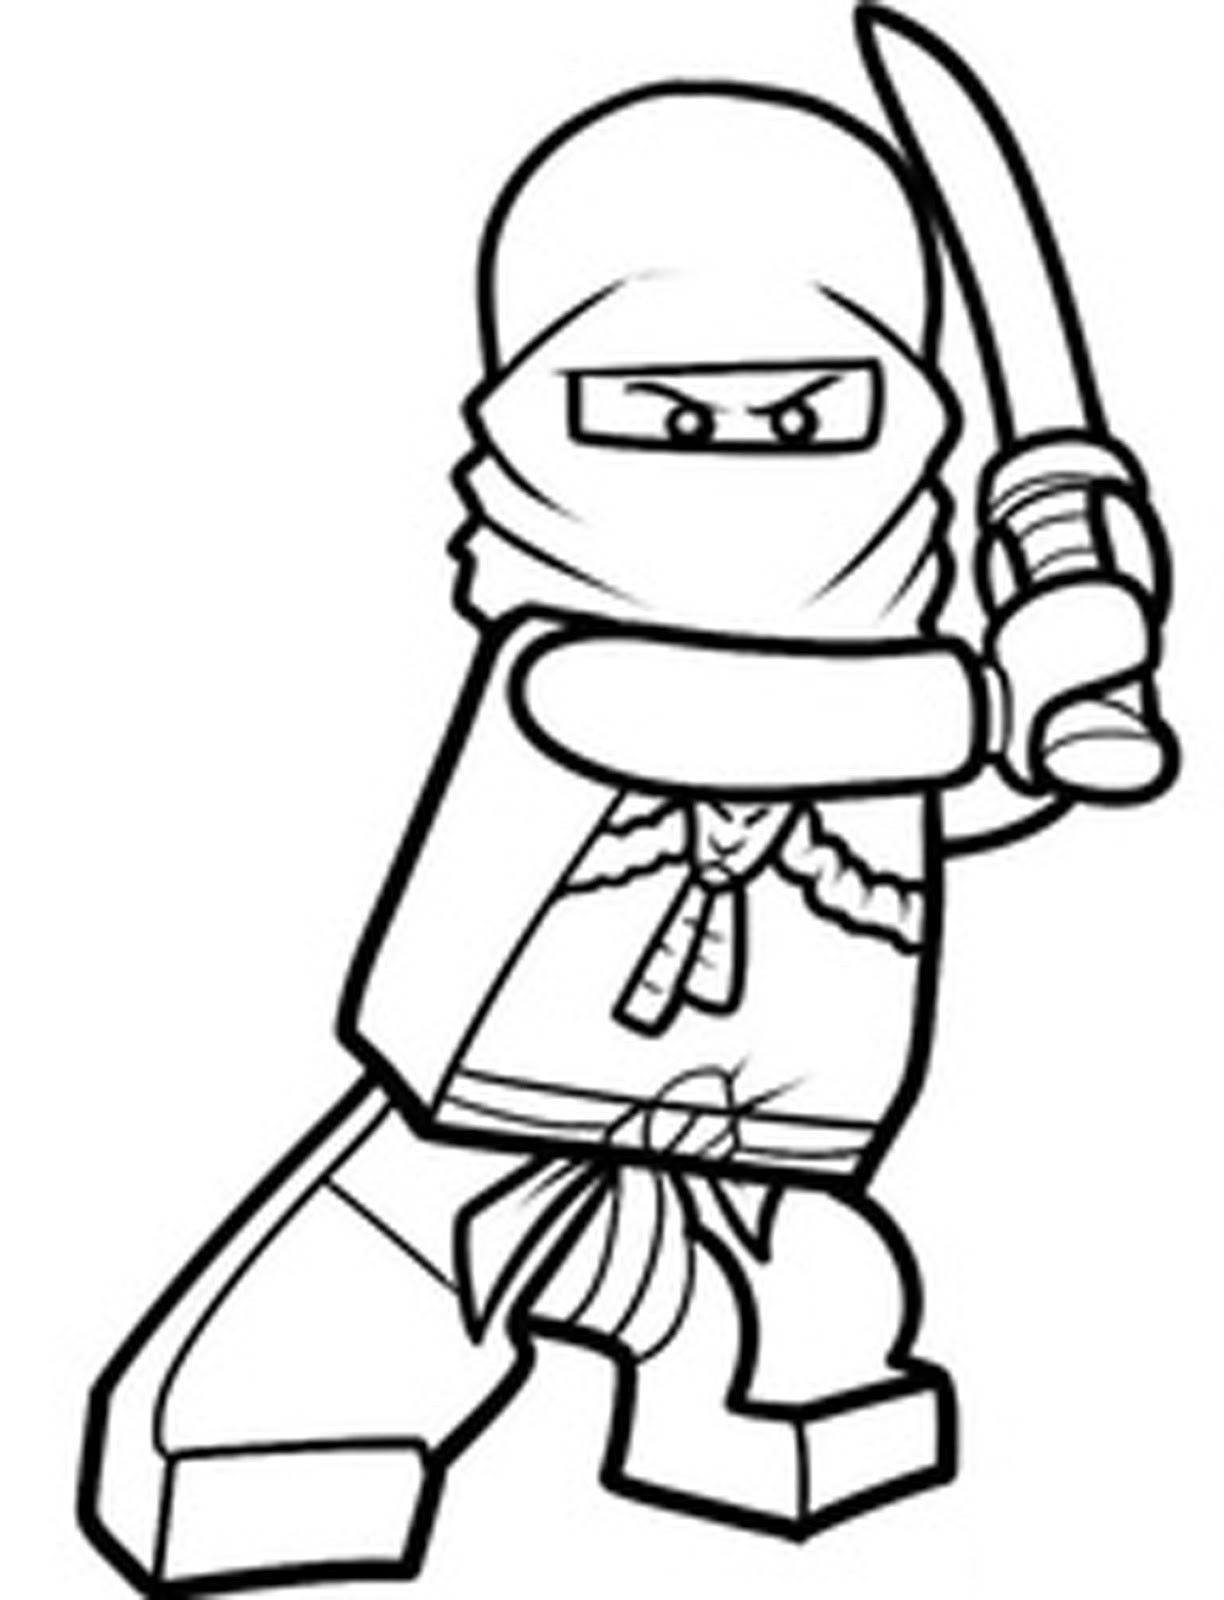 Boys Coloring Pages Ninjago
 T shirt logo design creative ideas Coloring Pages For Kids